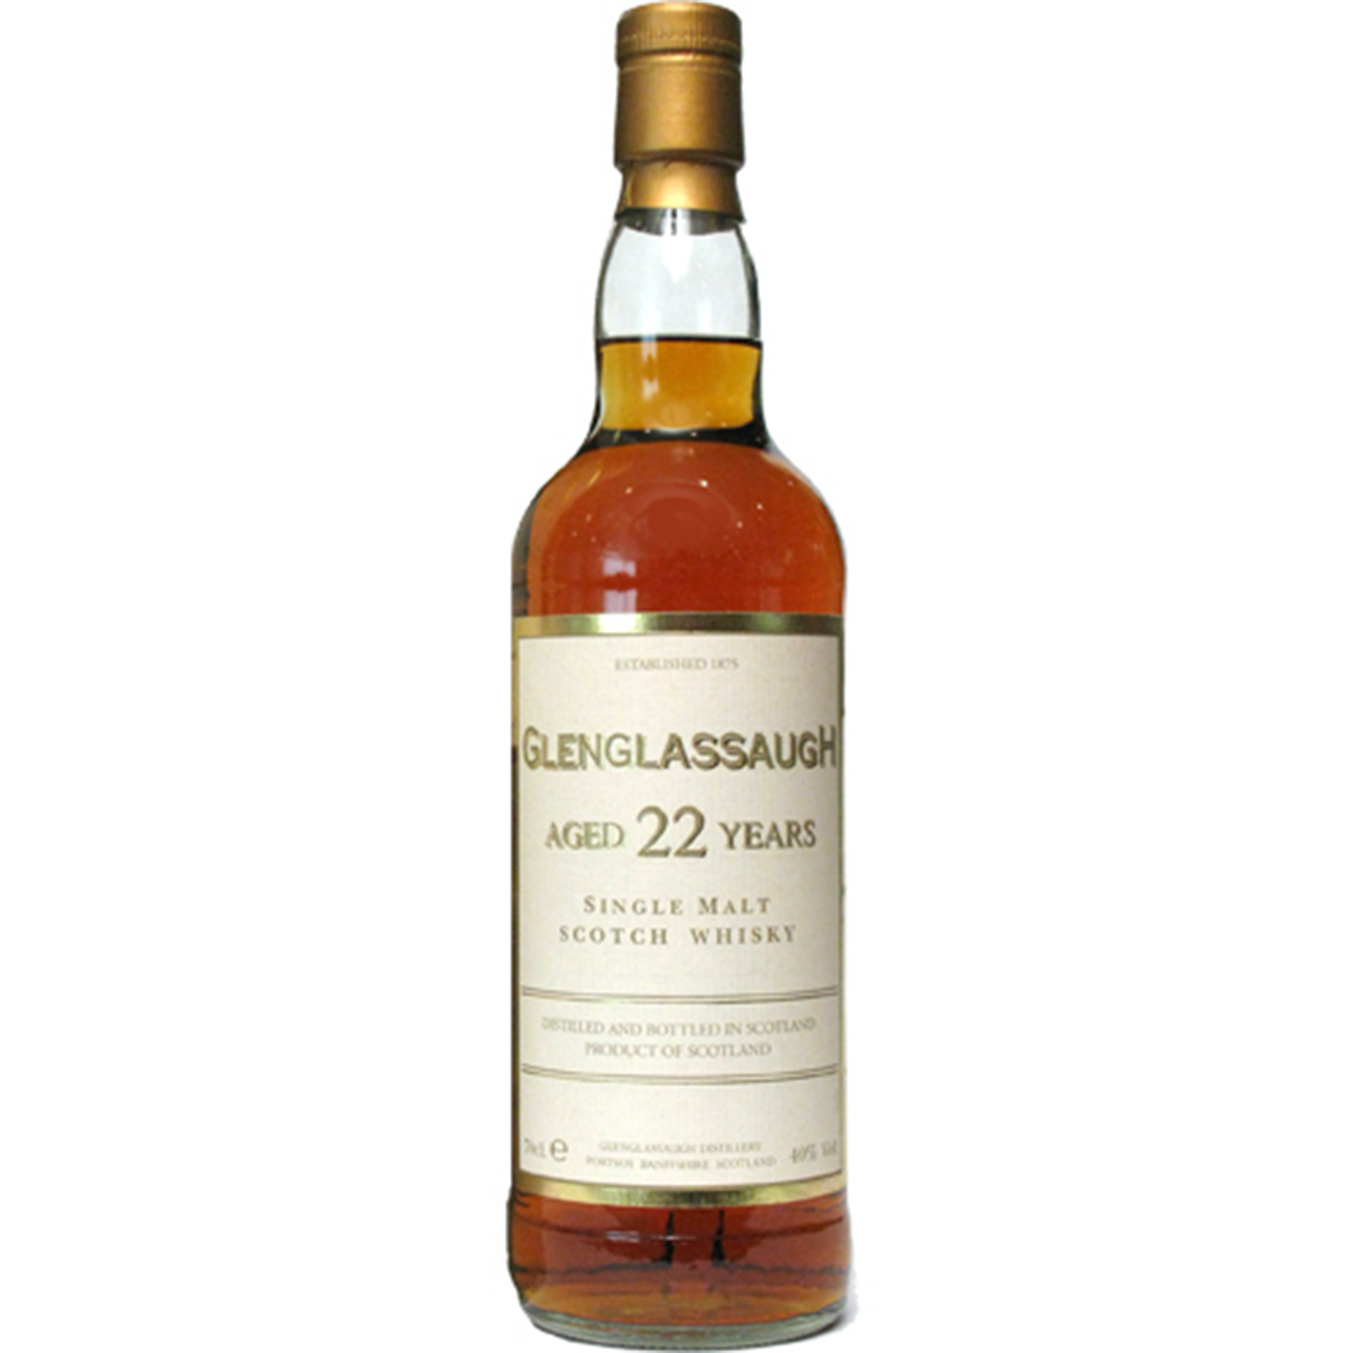 You are currently viewing Glenglassaugh 22 years